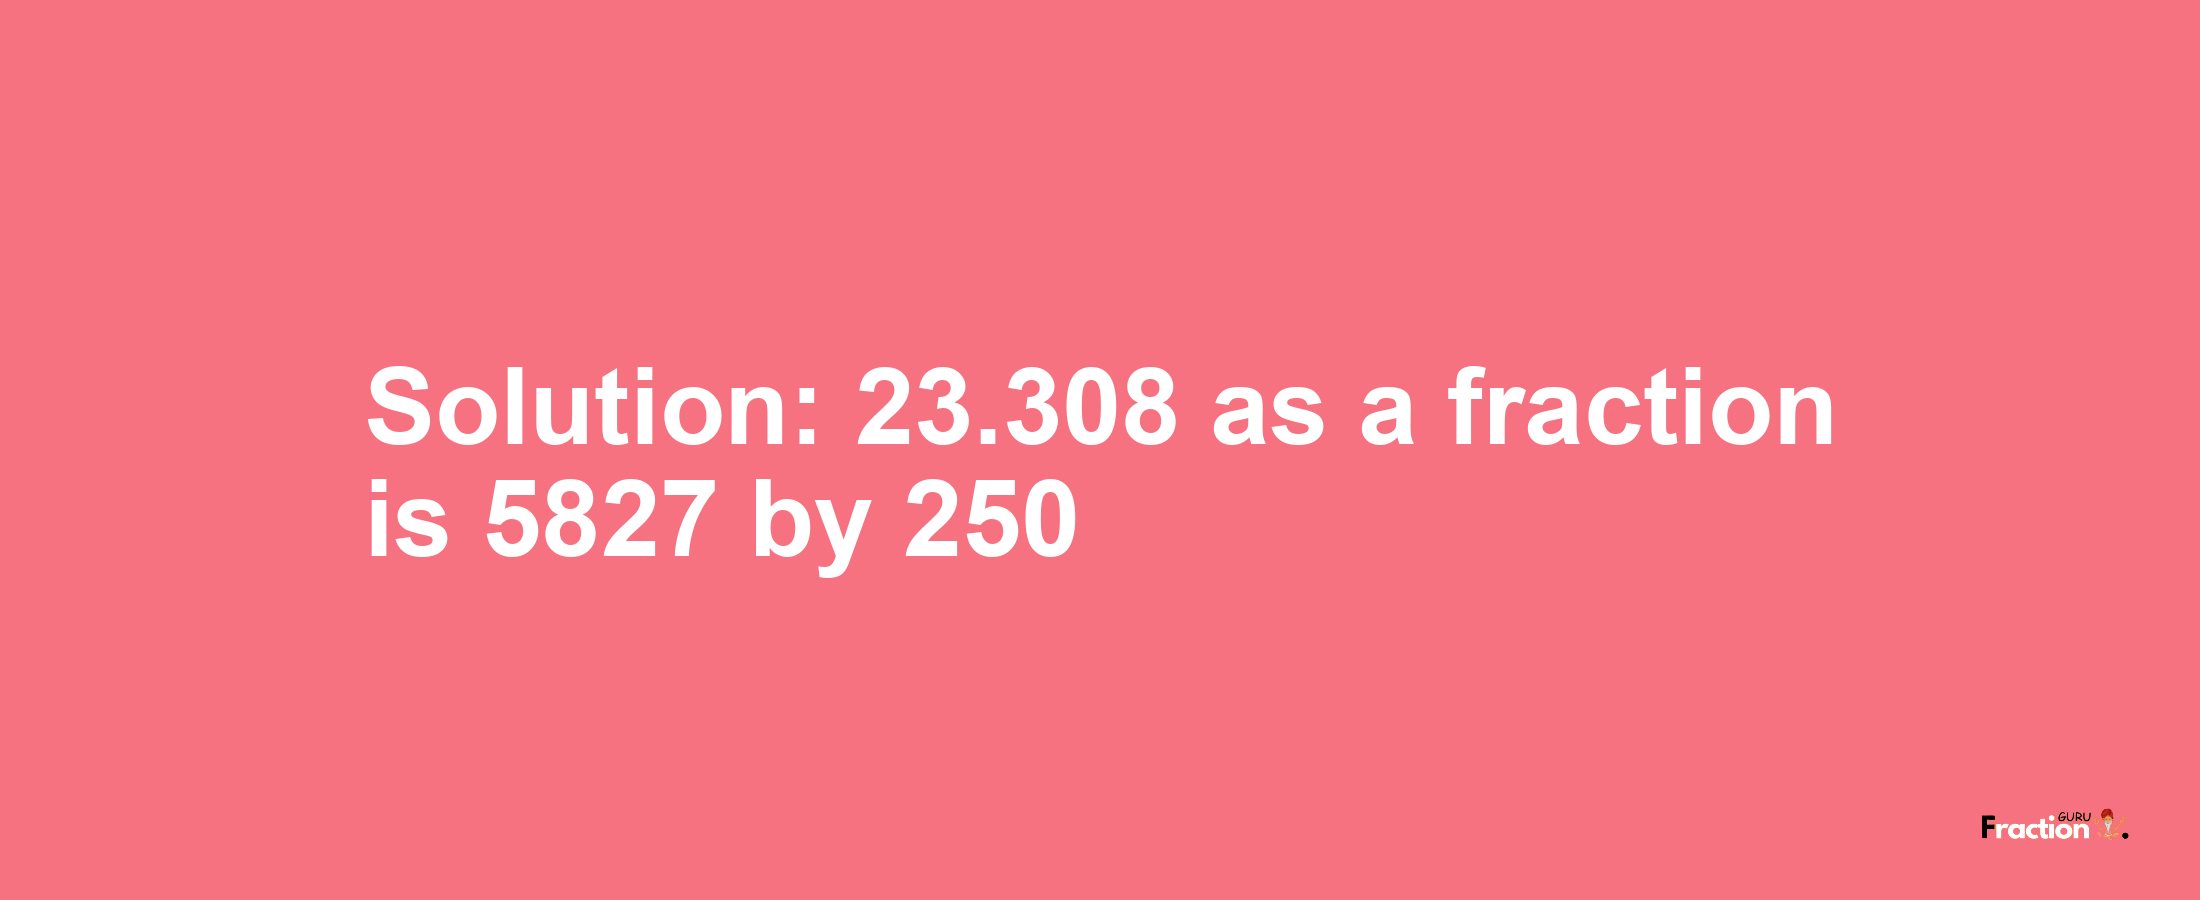 Solution:23.308 as a fraction is 5827/250